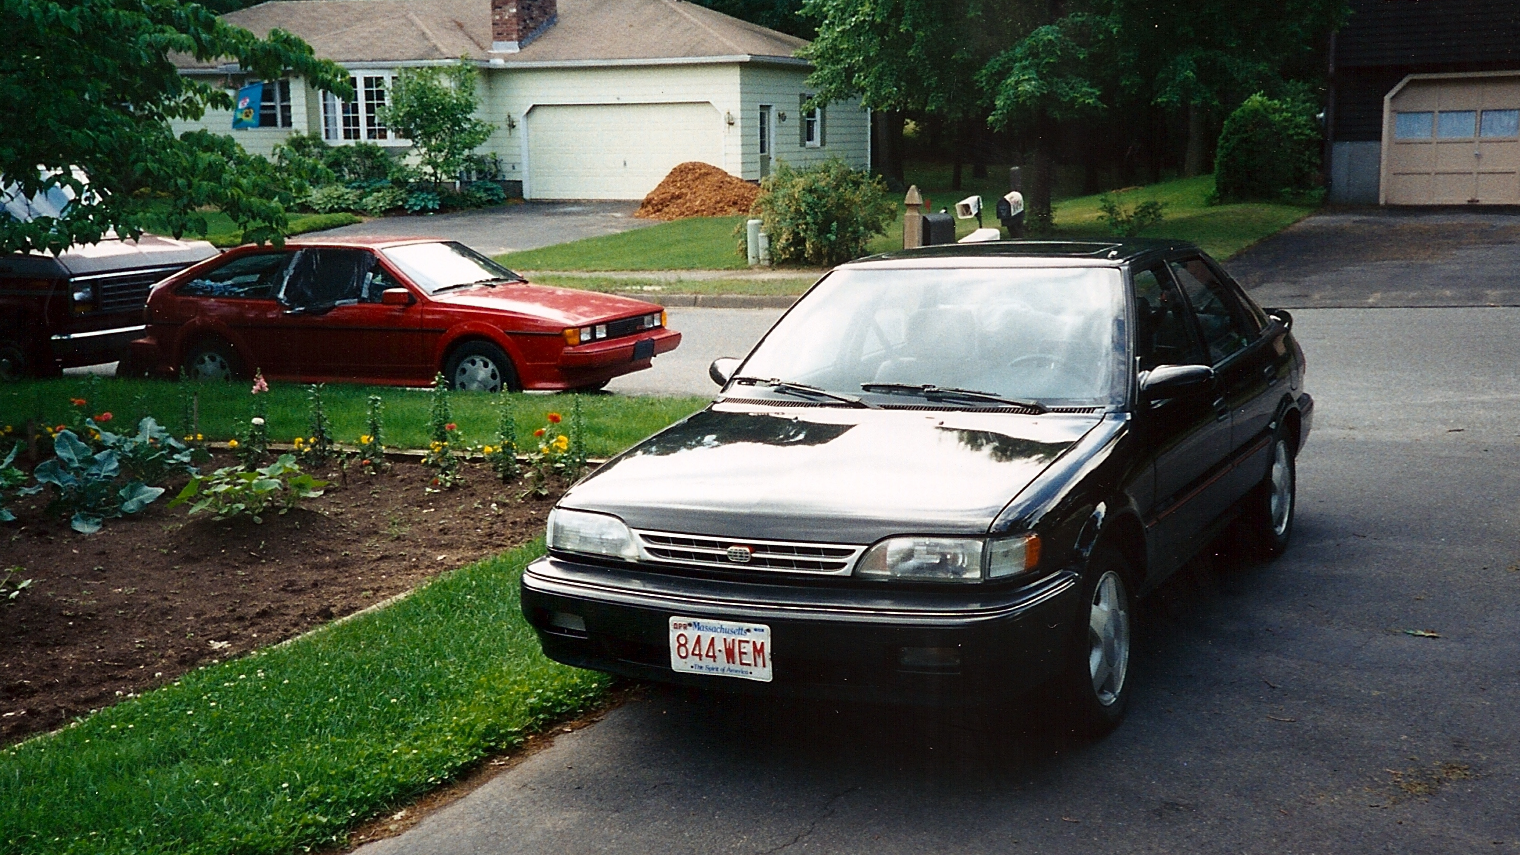 Yes, There Once Was a "Cool Geo", The Prizm GSi - Hello Road